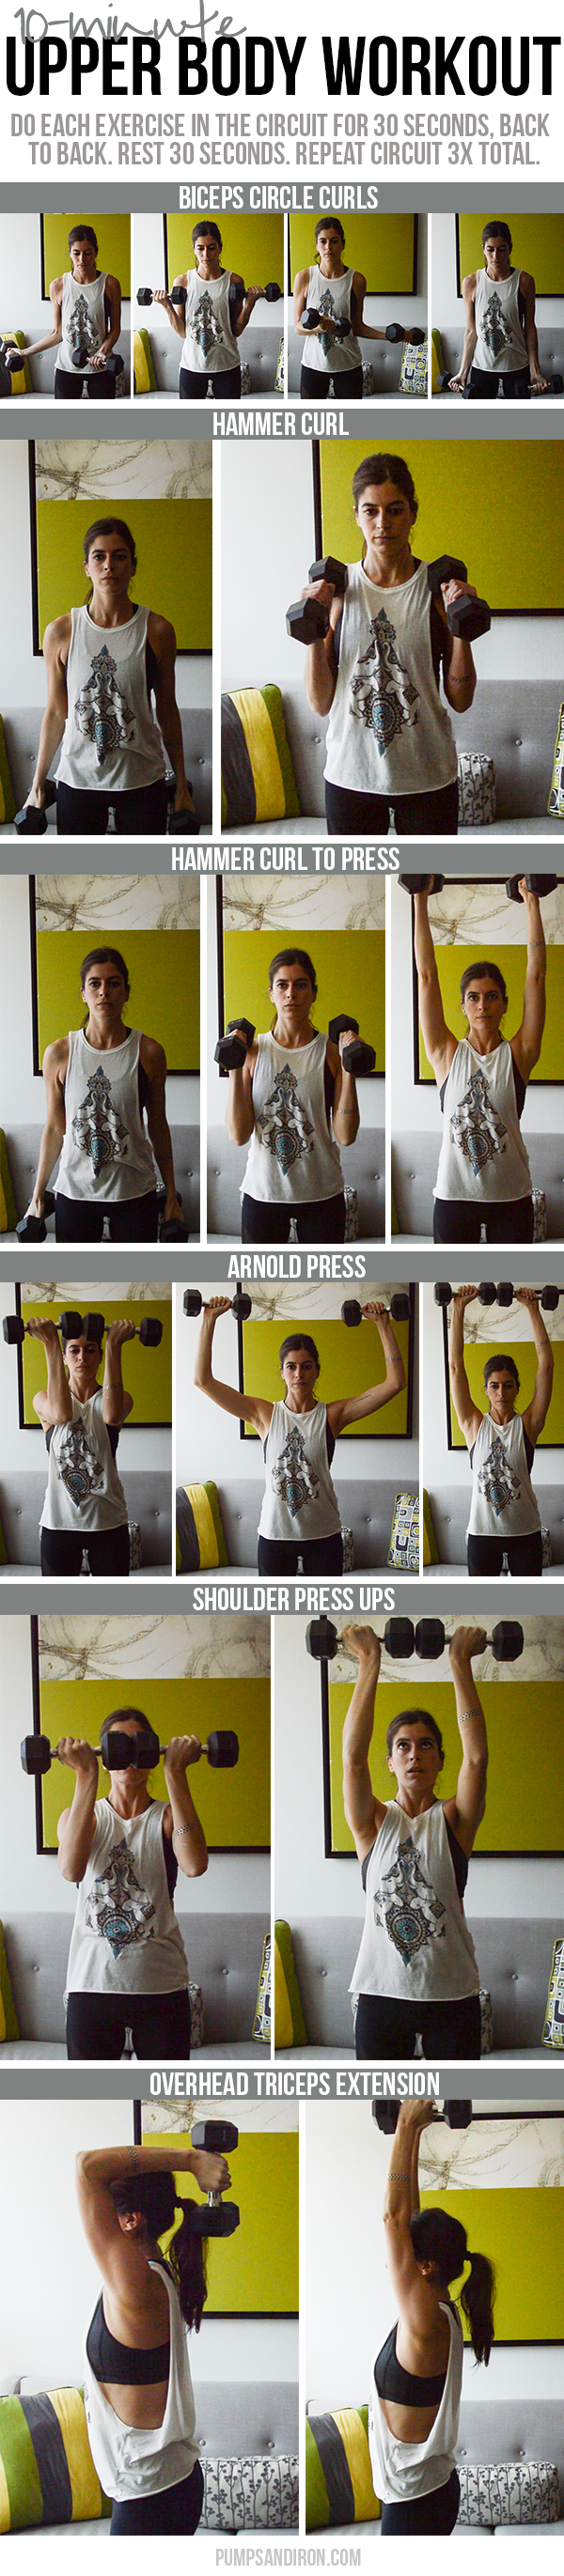 10 Minute Upper Body Dumbbell Workout Pumps Iron